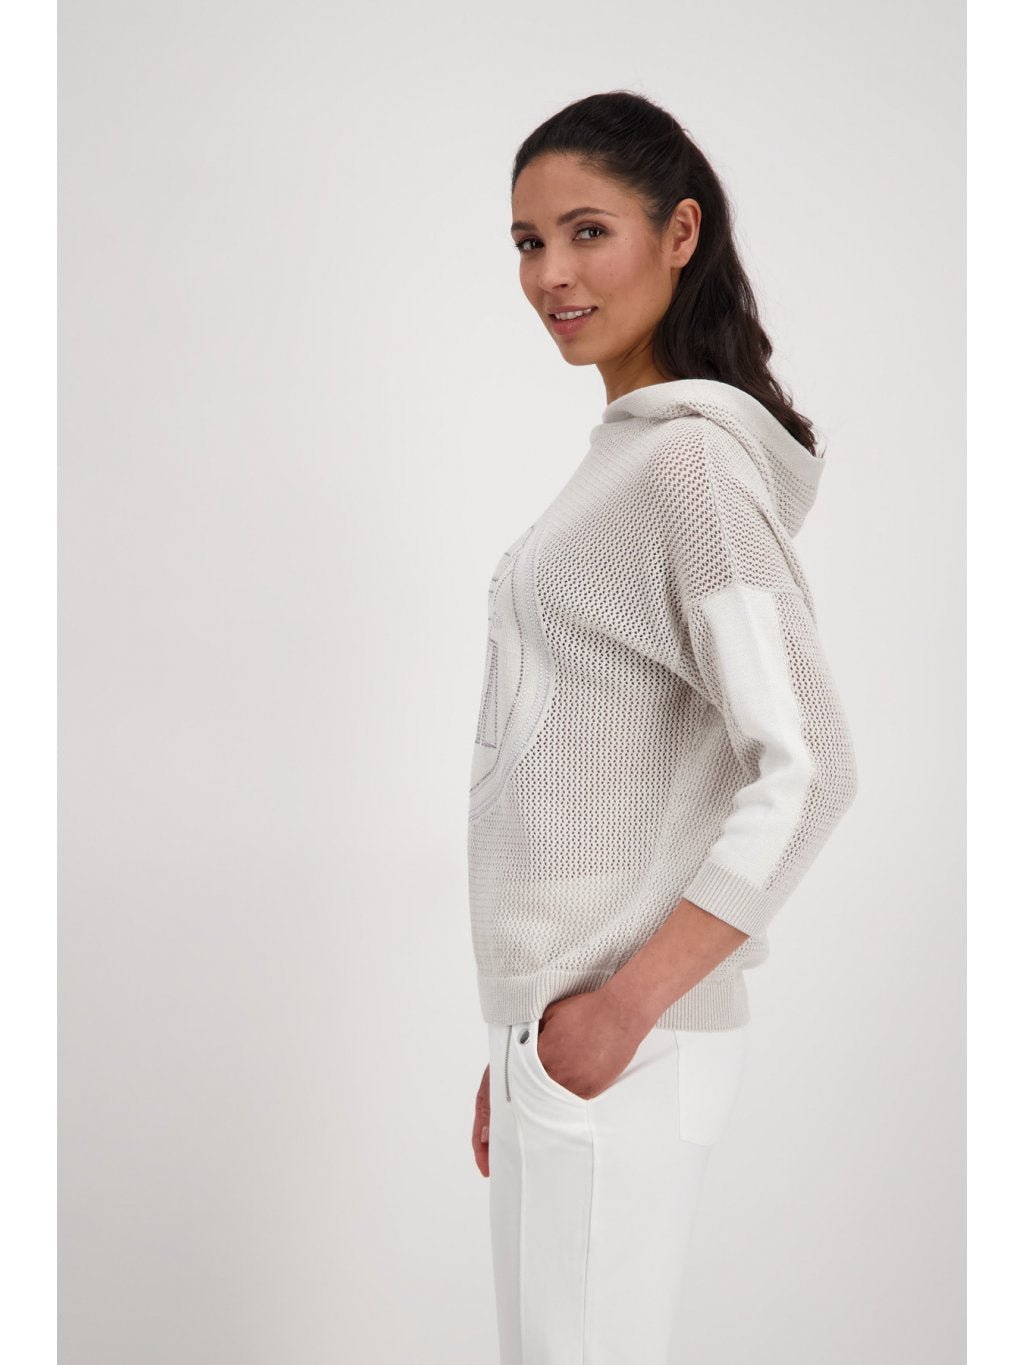 Shop Open Weave Hooded Sweater with Lurex Detail | Nude - Monari